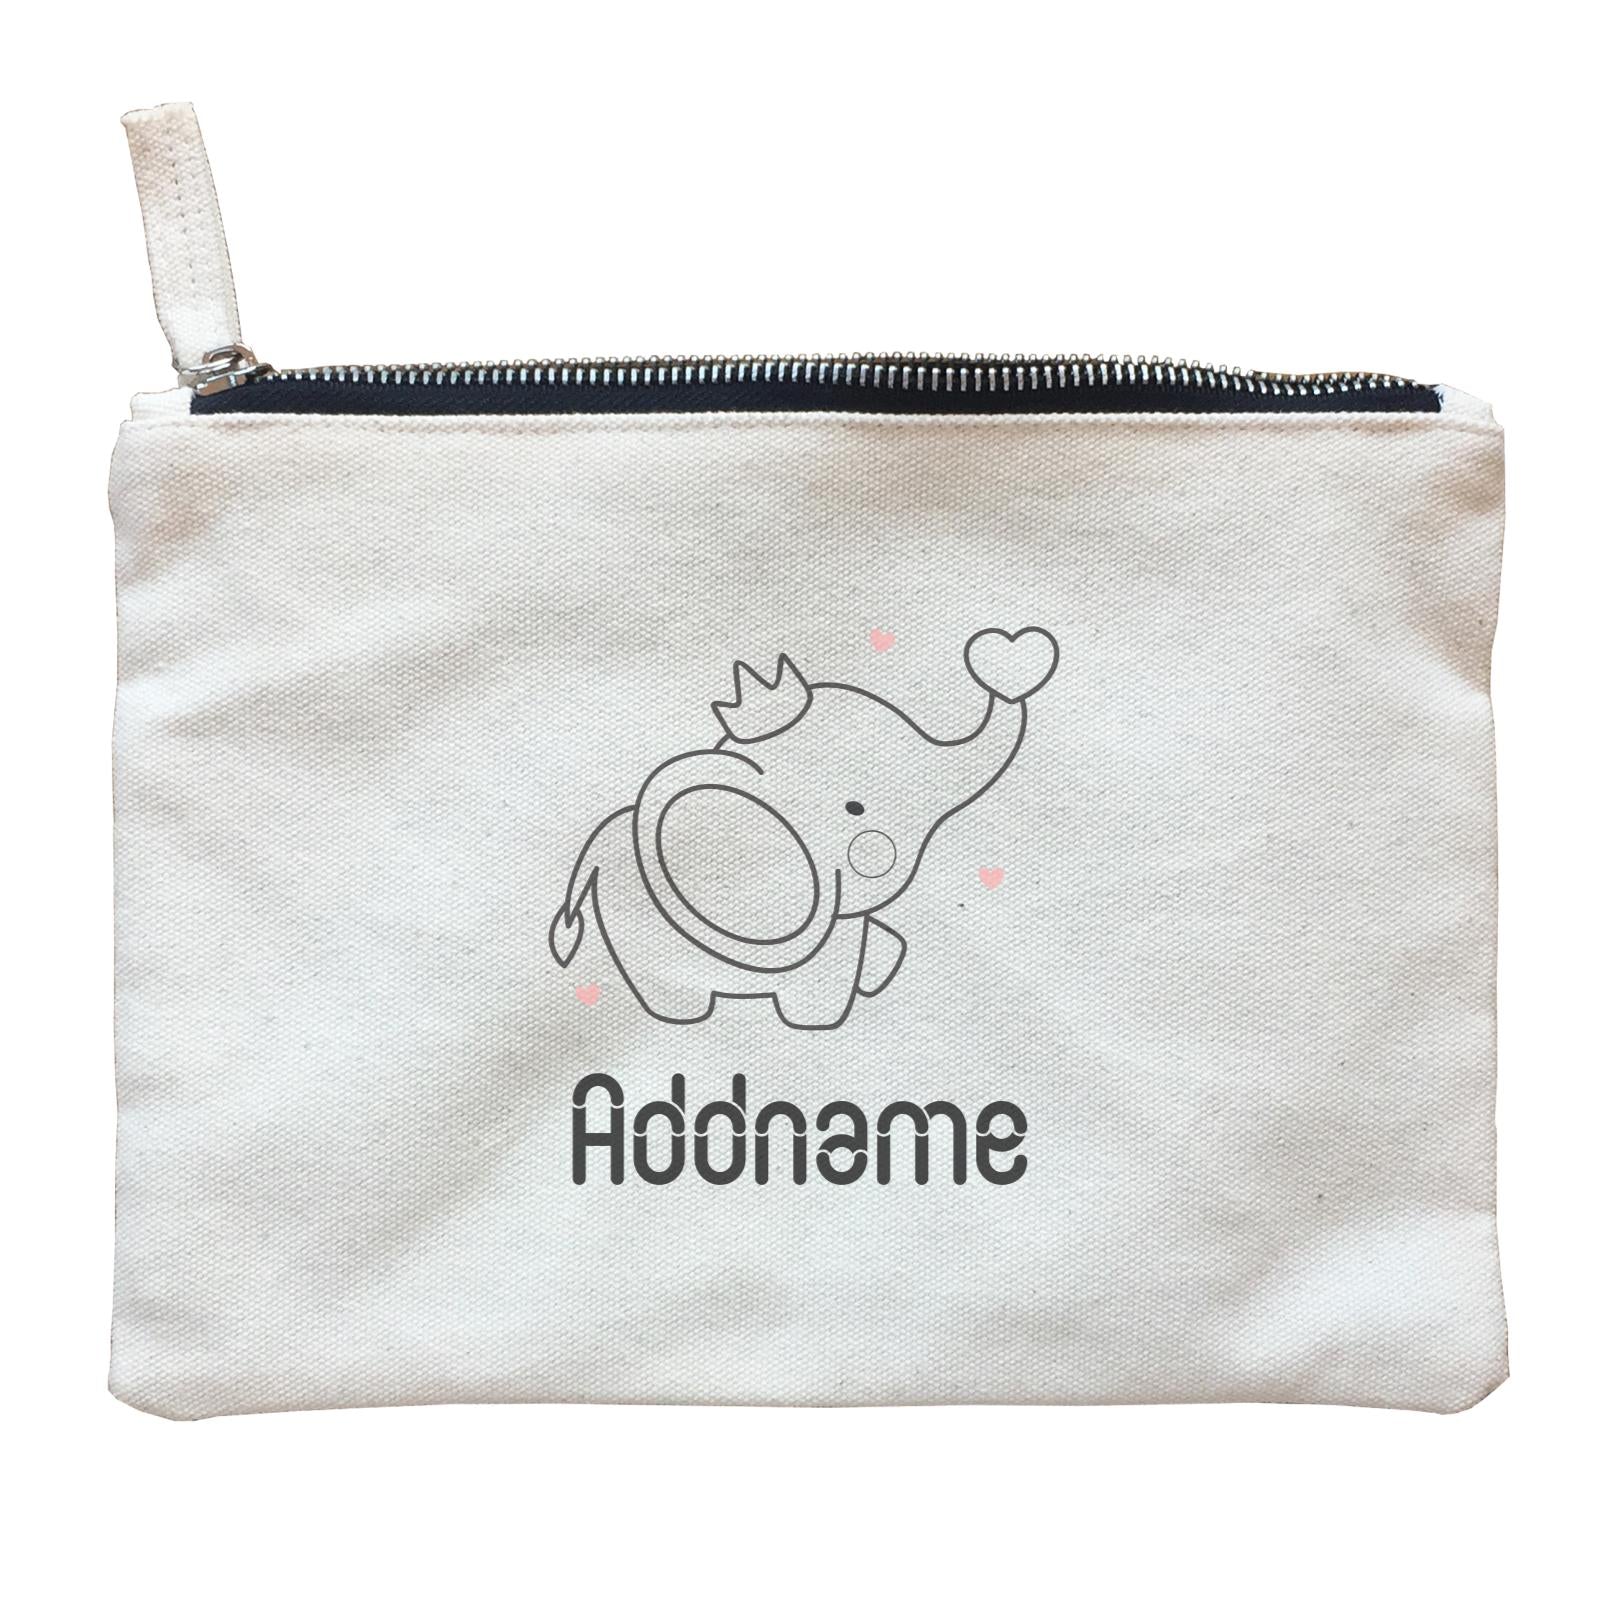 Coloring Outline Cute Hand Drawn Animals Elephants Baby Elephants With Heart And Crown Addname Zipper Pouch